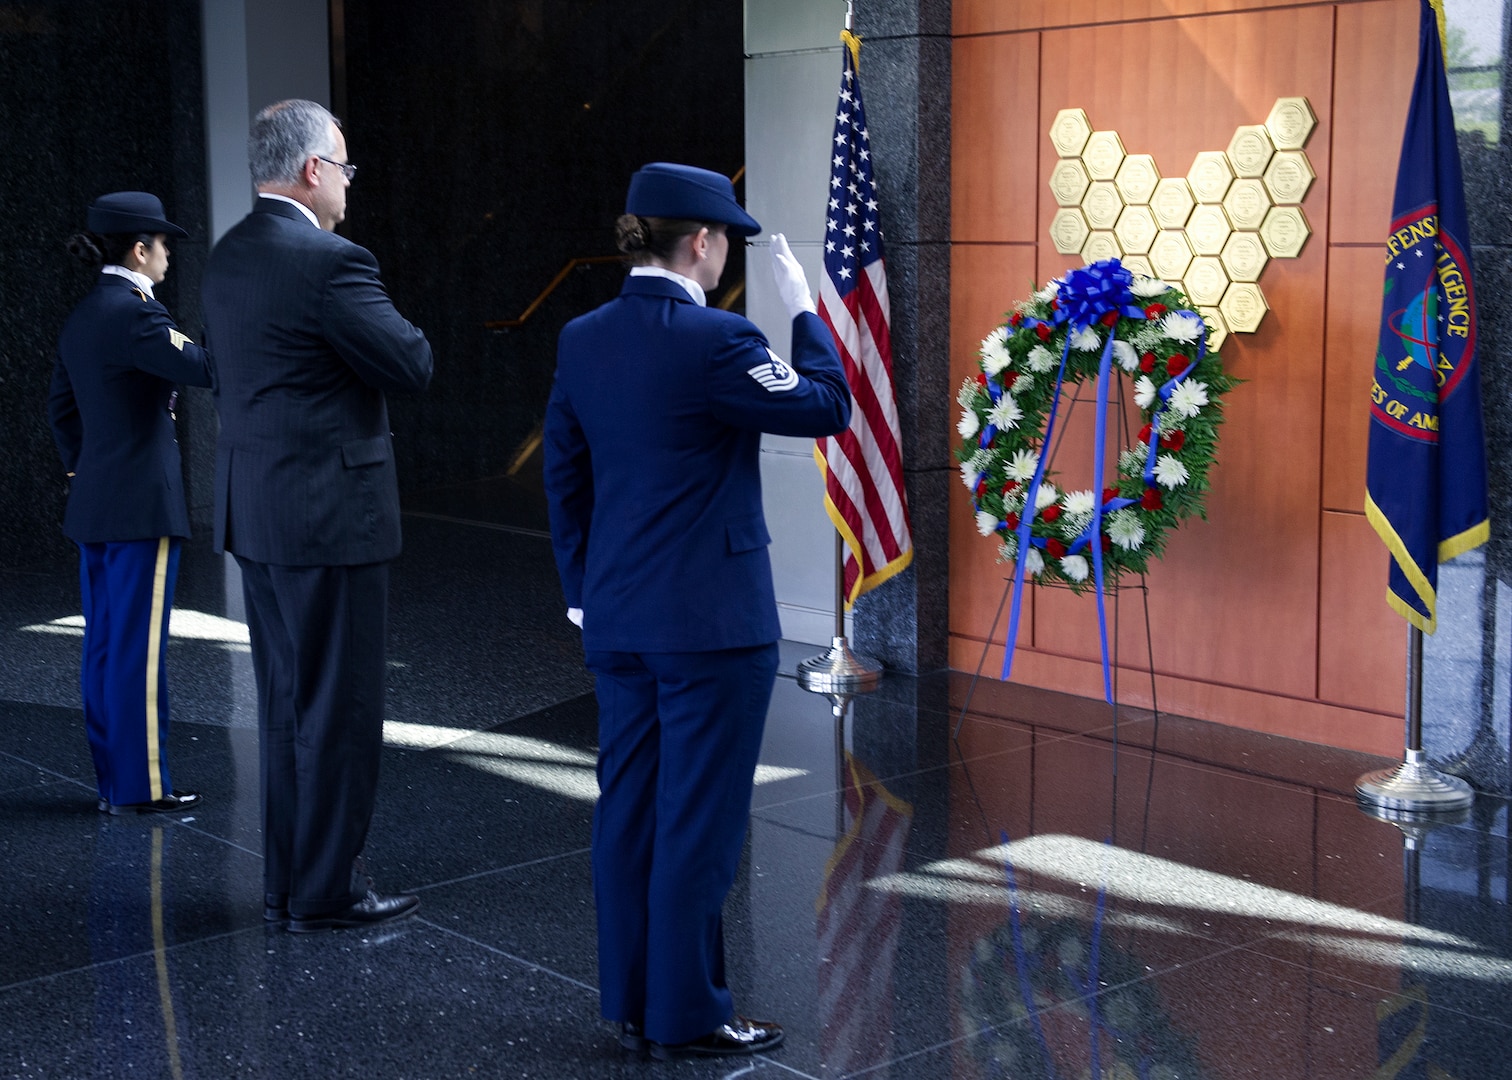 DIA’s Deputy Director David Shedd and members of the DIA Color Guard salute following a Memorial Day wreath laying at the agency’s Patriots Memorial.